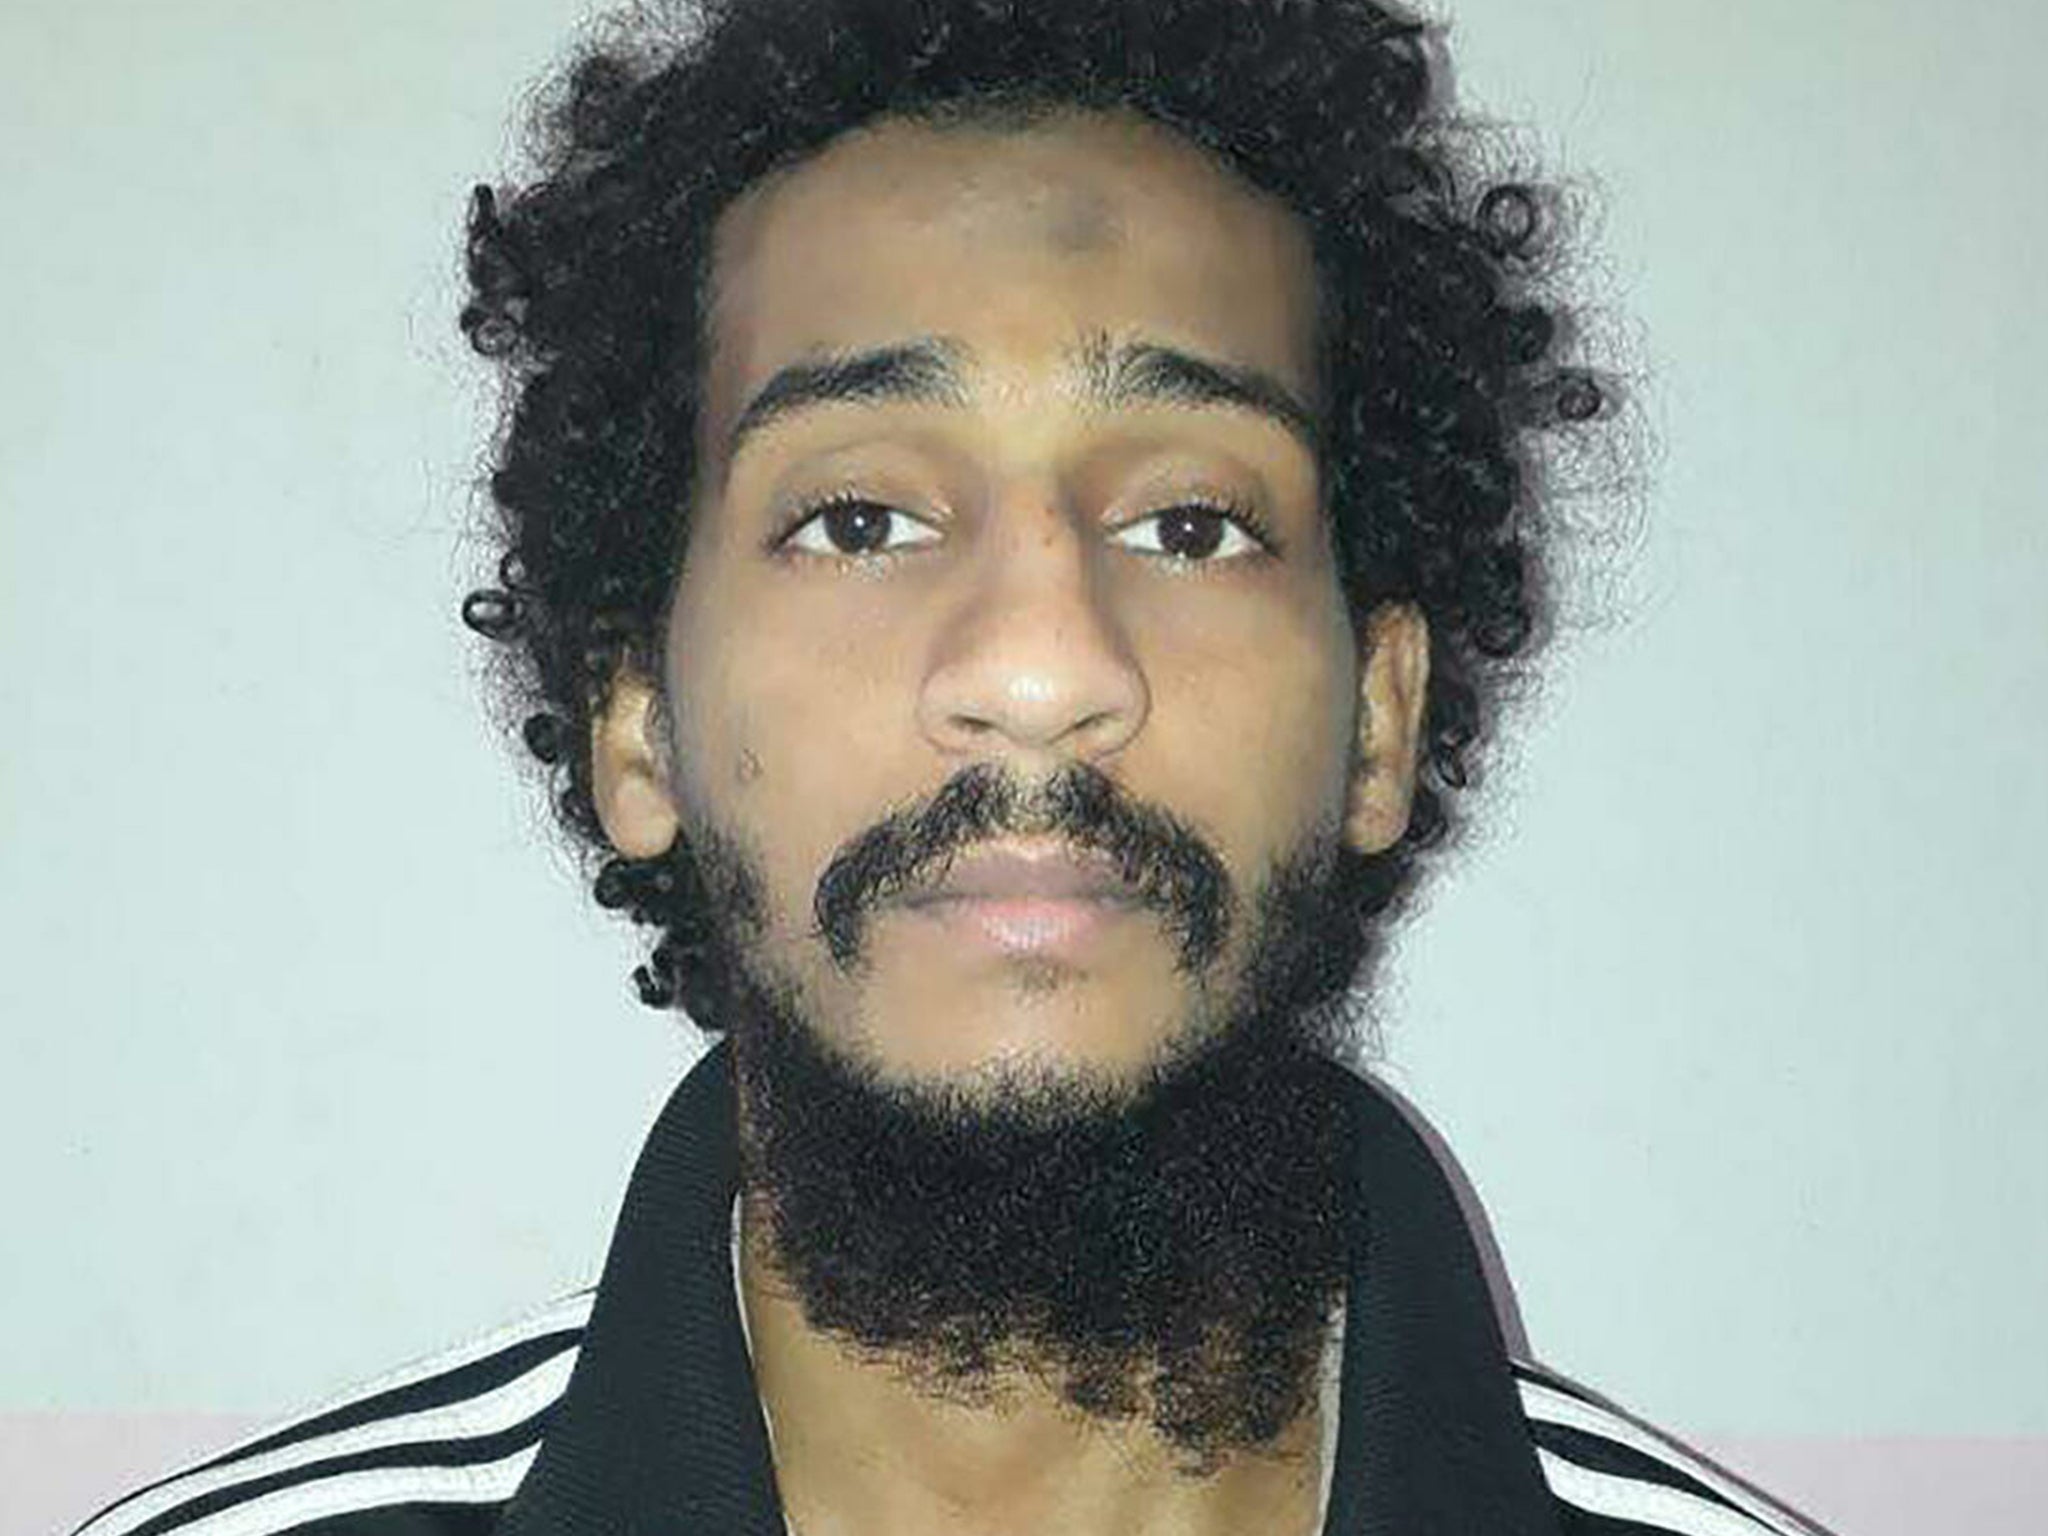 El Shafee Elsheikh photographed following his capture